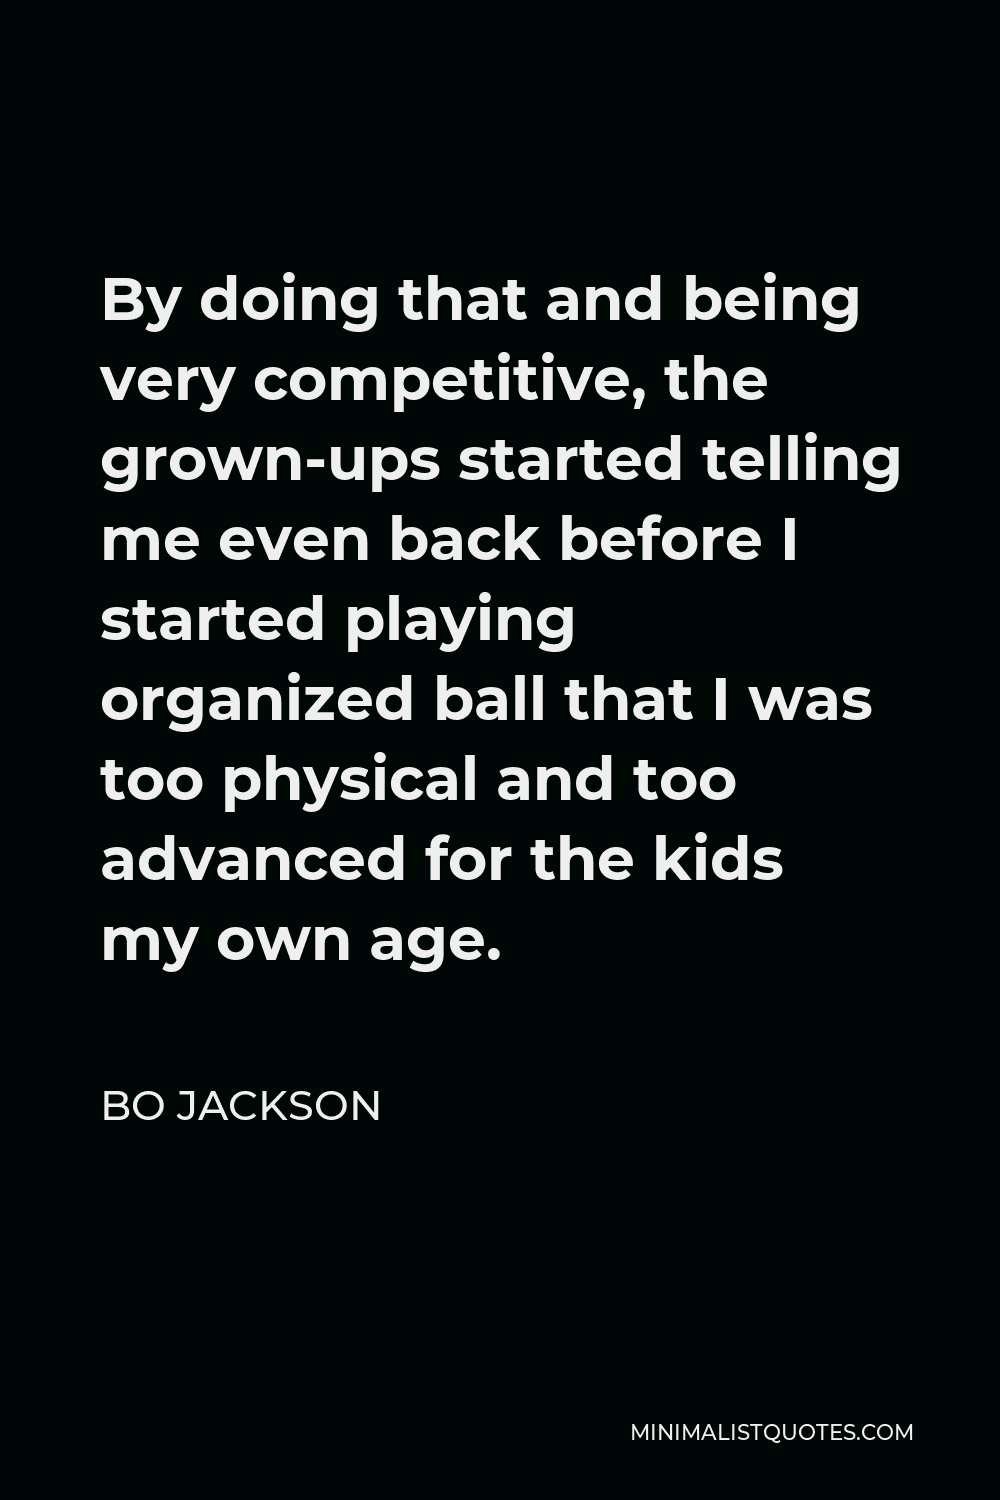 Bo Jackson Quote - By doing that and being very competitive, the grown-ups started telling me even back before I started playing organized ball that I was too physical and too advanced for the kids my own age.